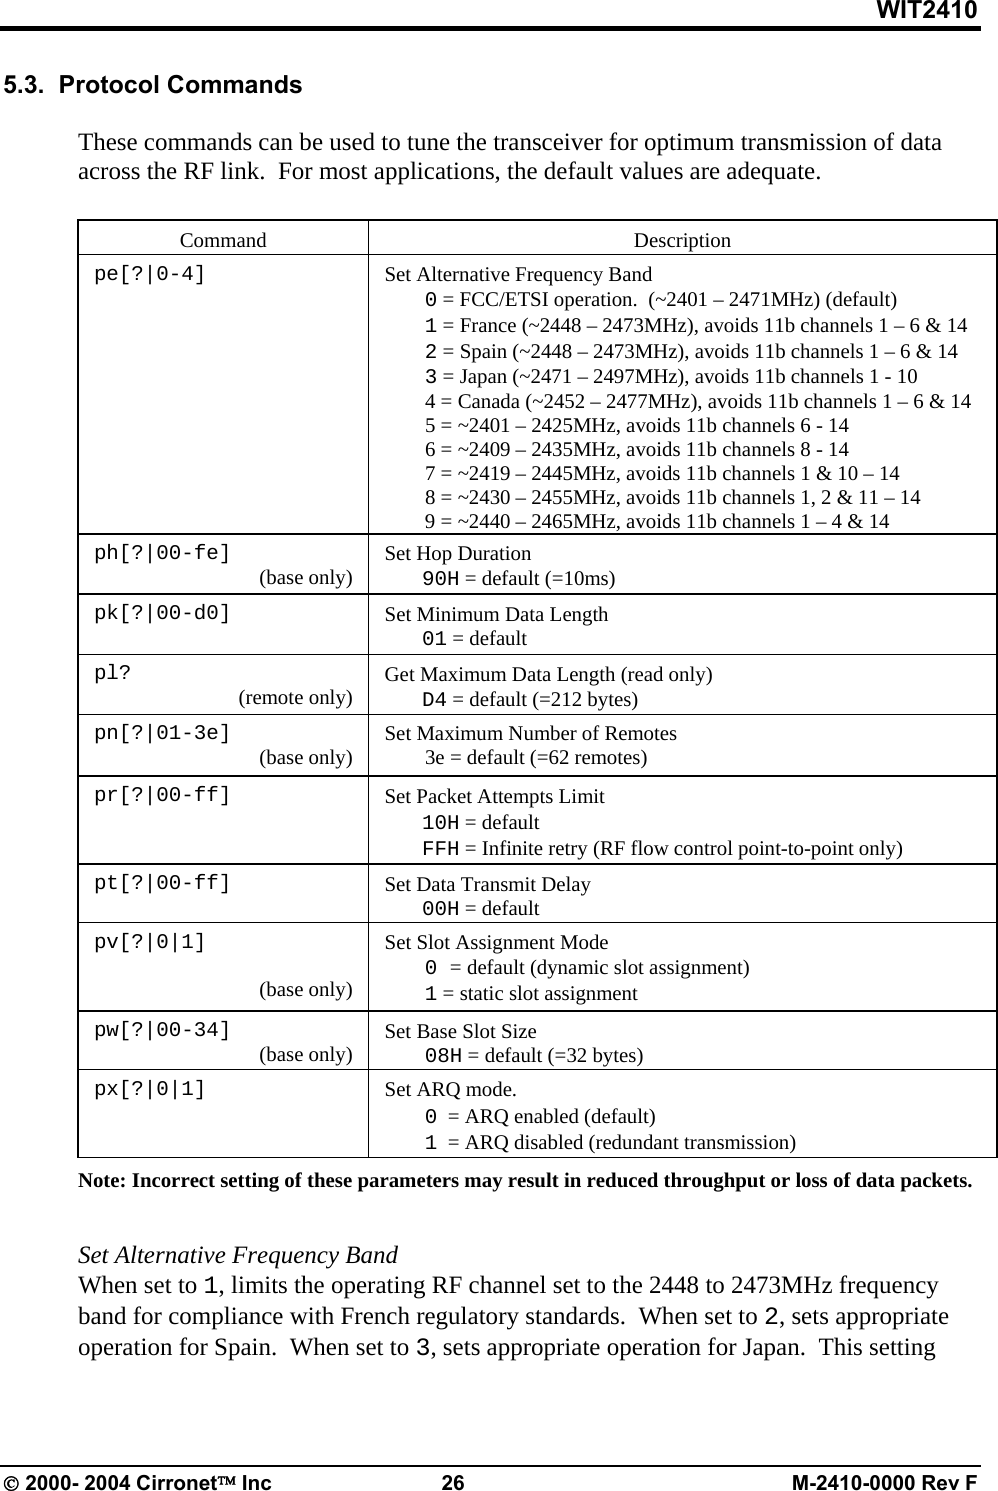 WIT2410 5.3.  Protocol Commands  These commands can be used to tune the transceiver for optimum transmission of data across the RF link.  For most applications, the default values are adequate.   Command   Description pe[?|0-4]  Set Alternative Frequency Band  0 = FCC/ETSI operation.  (~2401 – 2471MHz) (default)  1 = France (~2448 – 2473MHz), avoids 11b channels 1 – 6 &amp; 14  2 = Spain (~2448 – 2473MHz), avoids 11b channels 1 – 6 &amp; 14  3 = Japan (~2471 – 2497MHz), avoids 11b channels 1 - 10   4 = Canada (~2452 – 2477MHz), avoids 11b channels 1 – 6 &amp; 14   5 = ~2401 – 2425MHz, avoids 11b channels 6 - 14   6 = ~2409 – 2435MHz, avoids 11b channels 8 - 14   7 = ~2419 – 2445MHz, avoids 11b channels 1 &amp; 10 – 14   8 = ~2430 – 2455MHz, avoids 11b channels 1, 2 &amp; 11 – 14   9 = ~2440 – 2465MHz, avoids 11b channels 1 – 4 &amp; 14  ph[?|00-fe]  (base only)  Set Hop Duration  90H = default (=10ms)  pk[?|00-d0]      Set Minimum Data Length  01 = default  pl?  (remote only)    Get Maximum Data Length (read only)  D4 = default (=212 bytes) pn[?|01-3e]  (base only)  Set Maximum Number of Remotes   3e = default (=62 remotes)  pr[?|00-ff]                                     Set Packet Attempts Limit  10H = default  FFH = Infinite retry (RF flow control point-to-point only)  pt[?|00-ff]    Set Data Transmit Delay  00H = default    pv[?|0|1]  (base only) Set Slot Assignment Mode  0 = default (dynamic slot assignment)  1 = static slot assignment pw[?|00-34]  (base only)  Set Base Slot Size  08H = default (=32 bytes) px[?|0|1]  Set ARQ mode.    0  = ARQ enabled (default)  1  = ARQ disabled (redundant transmission) Note: Incorrect setting of these parameters may result in reduced throughput or loss of data packets.     Set Alternative Frequency Band When set to 1, limits the operating RF channel set to the 2448 to 2473MHz frequency band for compliance with French regulatory standards.  When set to 2, sets appropriate operation for Spain.  When set to 3, sets appropriate operation for Japan.  This setting © 2000- 2004 Cirronet™ Inc  26  M-2410-0000 Rev F 